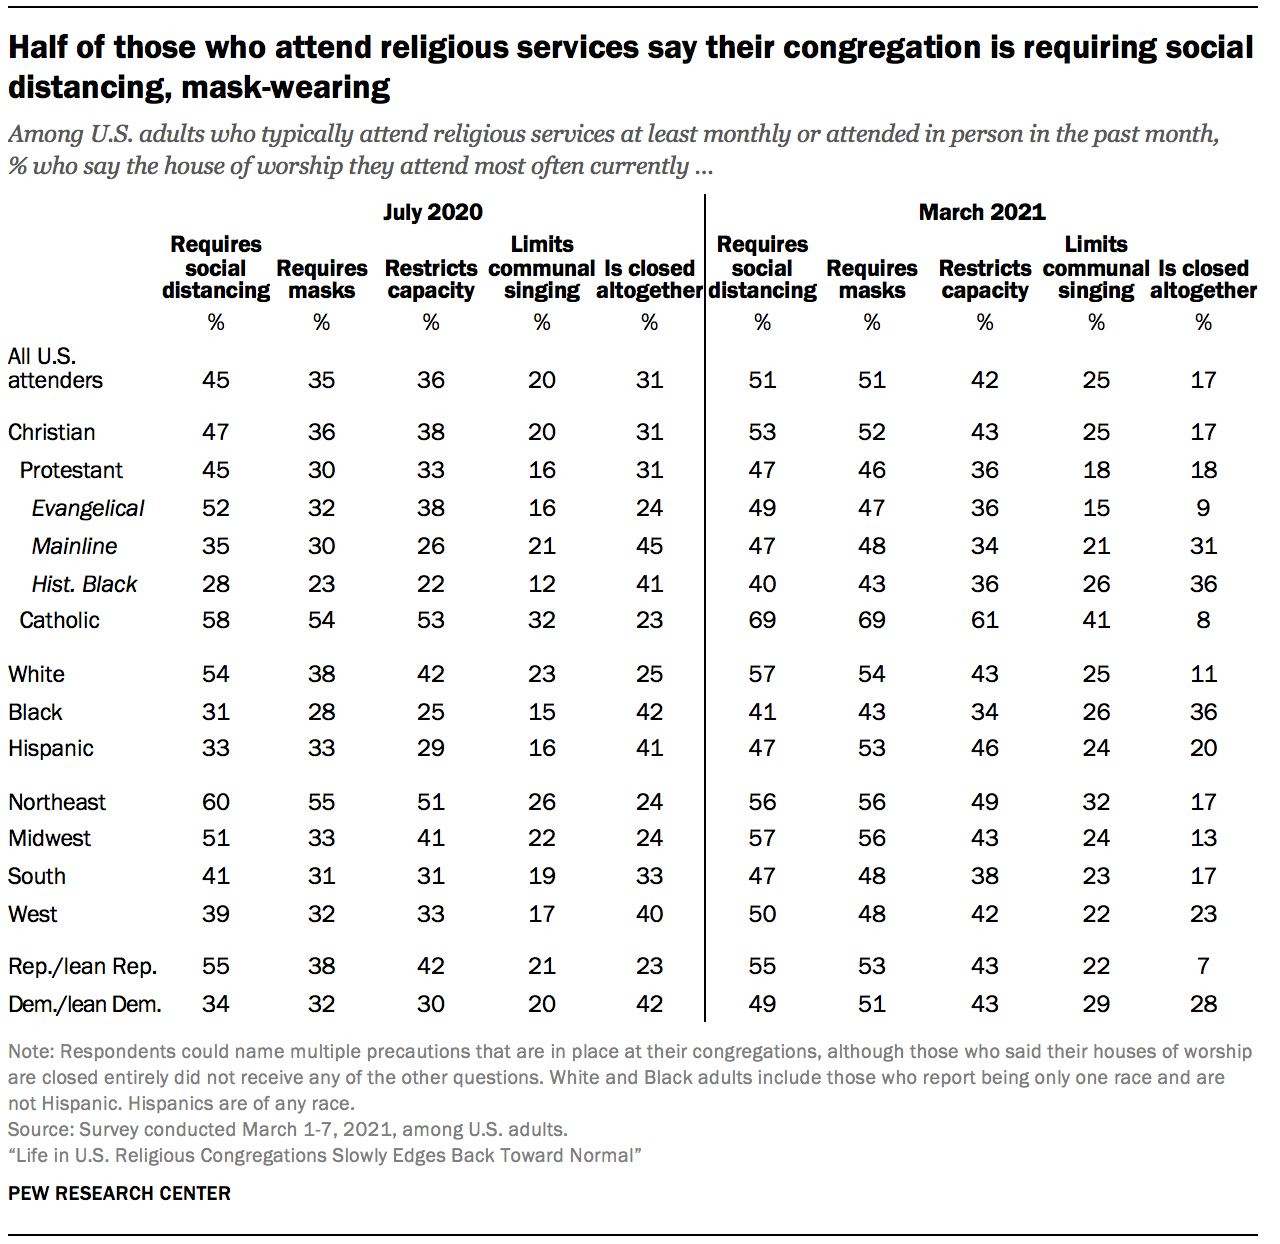 Half of those who attend religious services say their congregation is requiring social distancing, mask-wearing